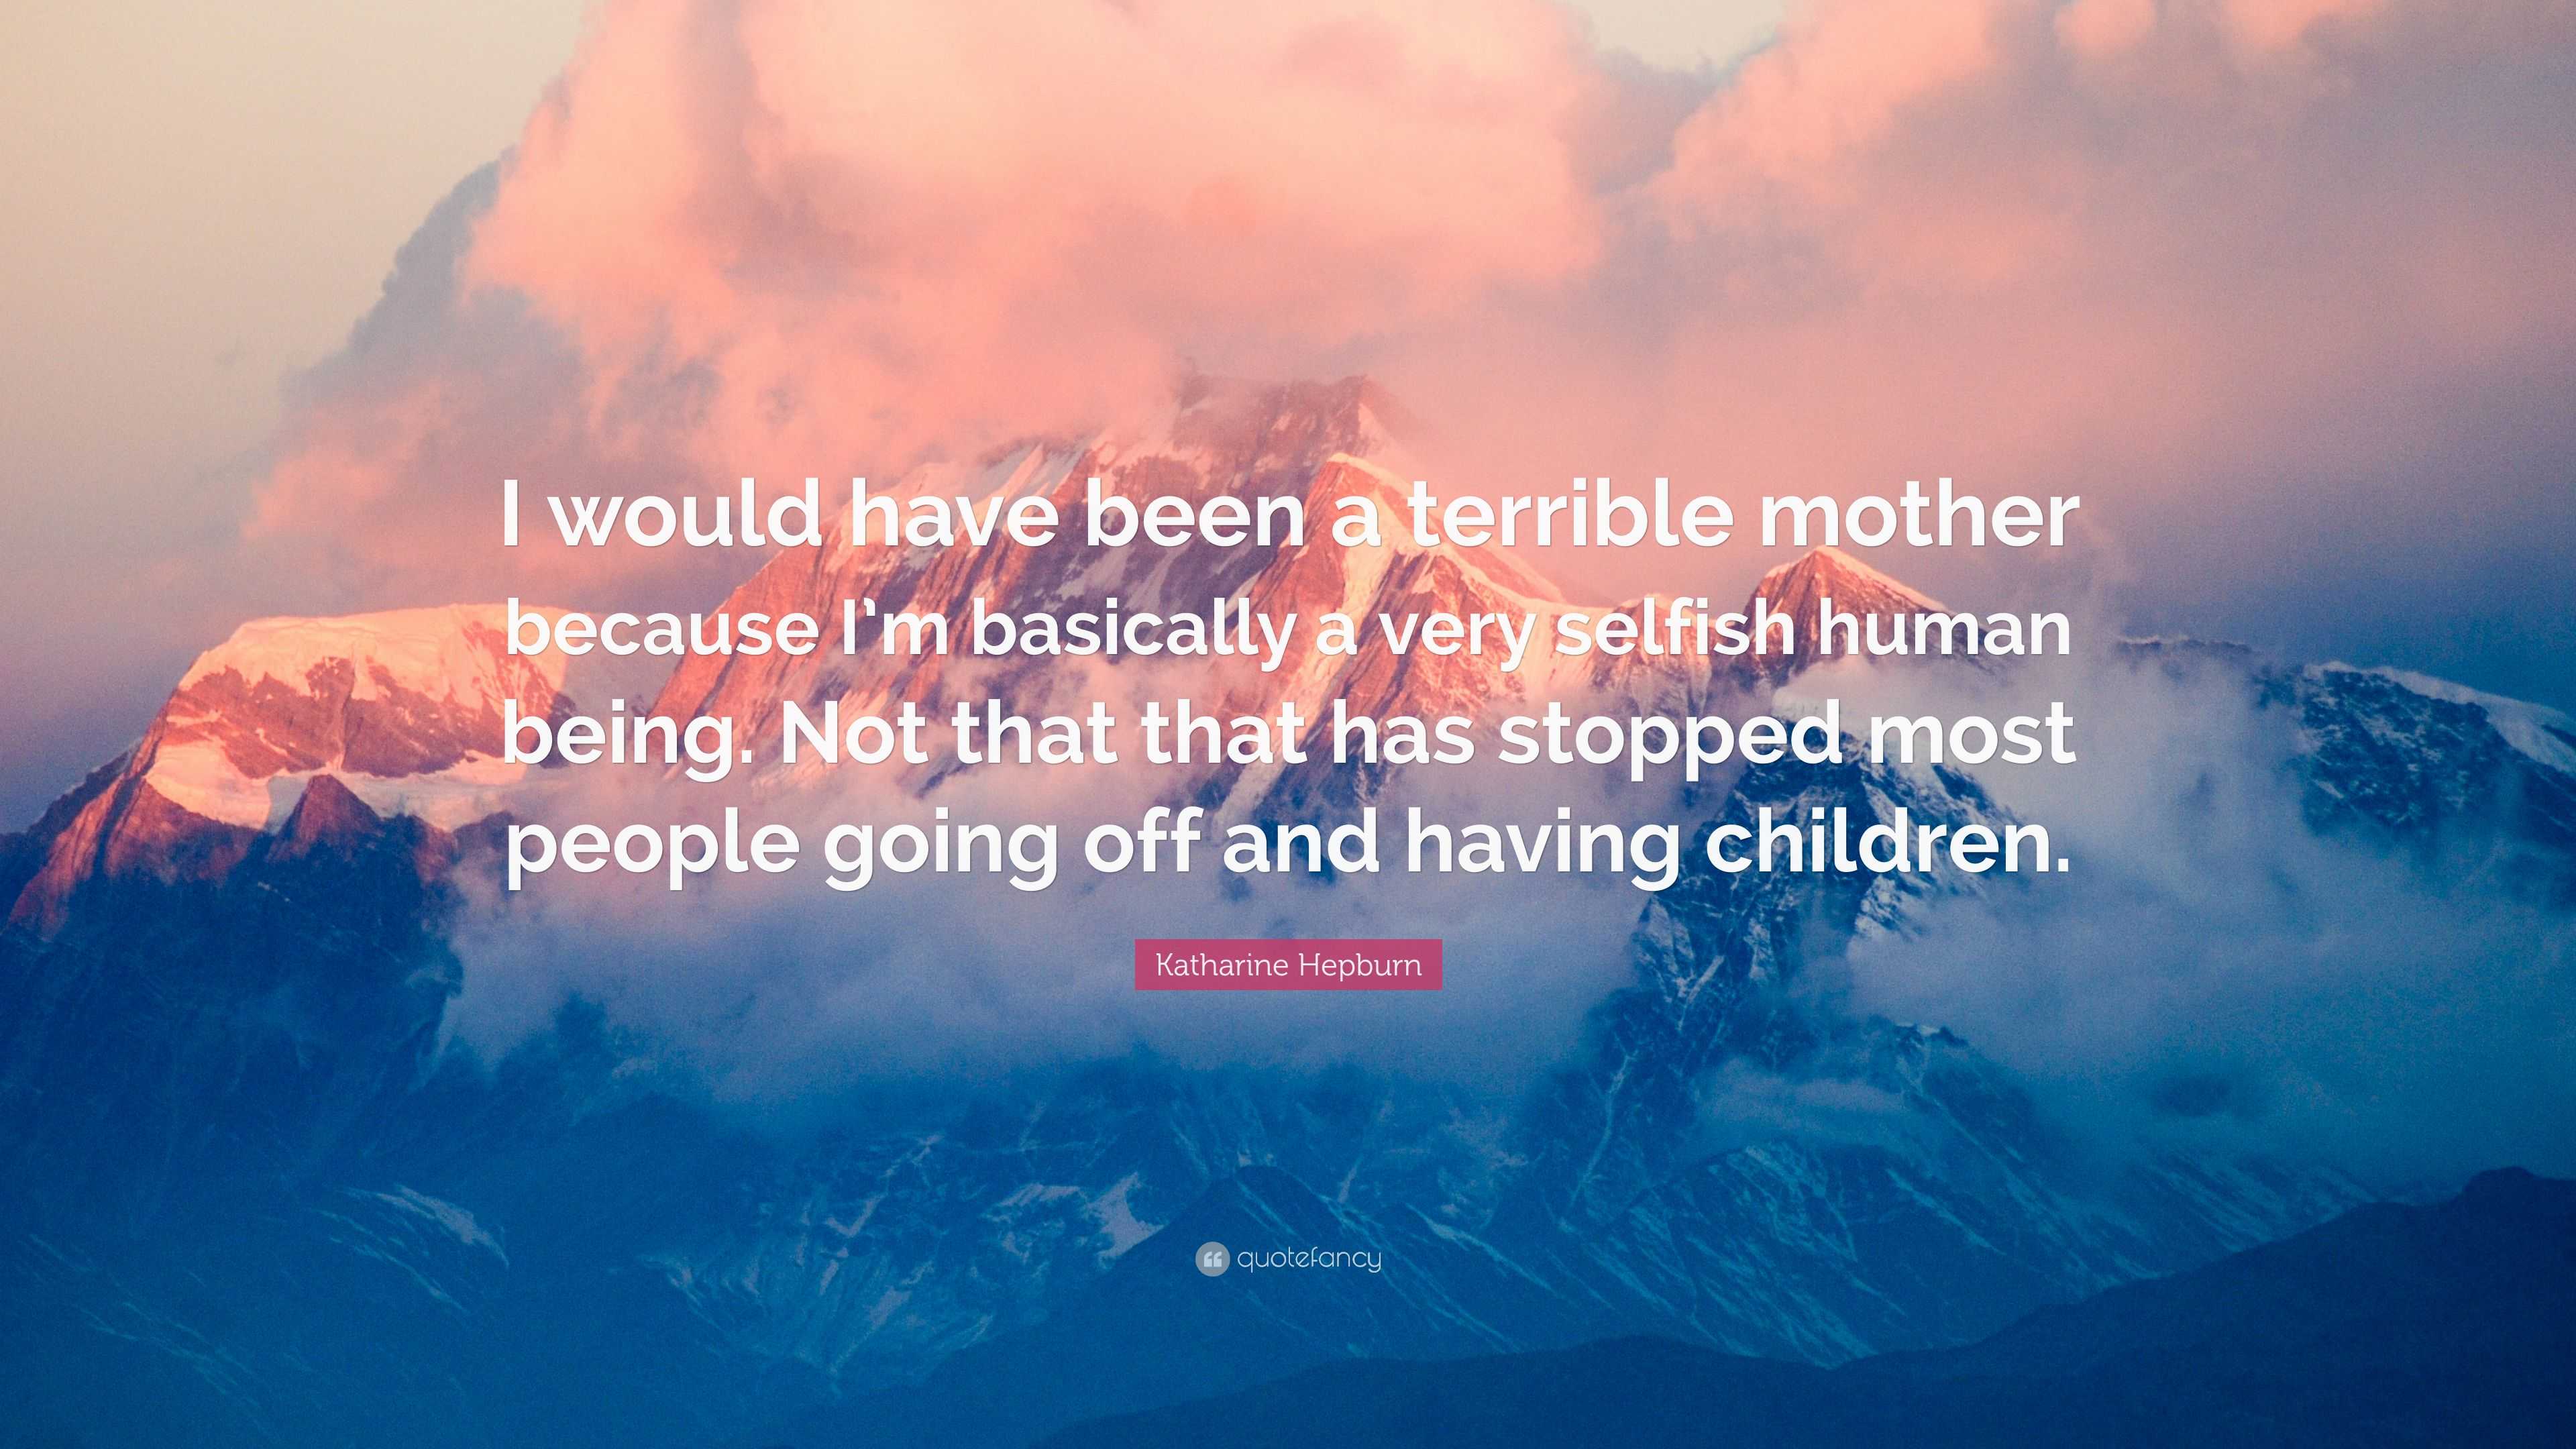 Katharine Hepburn Quote: “I would have been a terrible mother because I ...